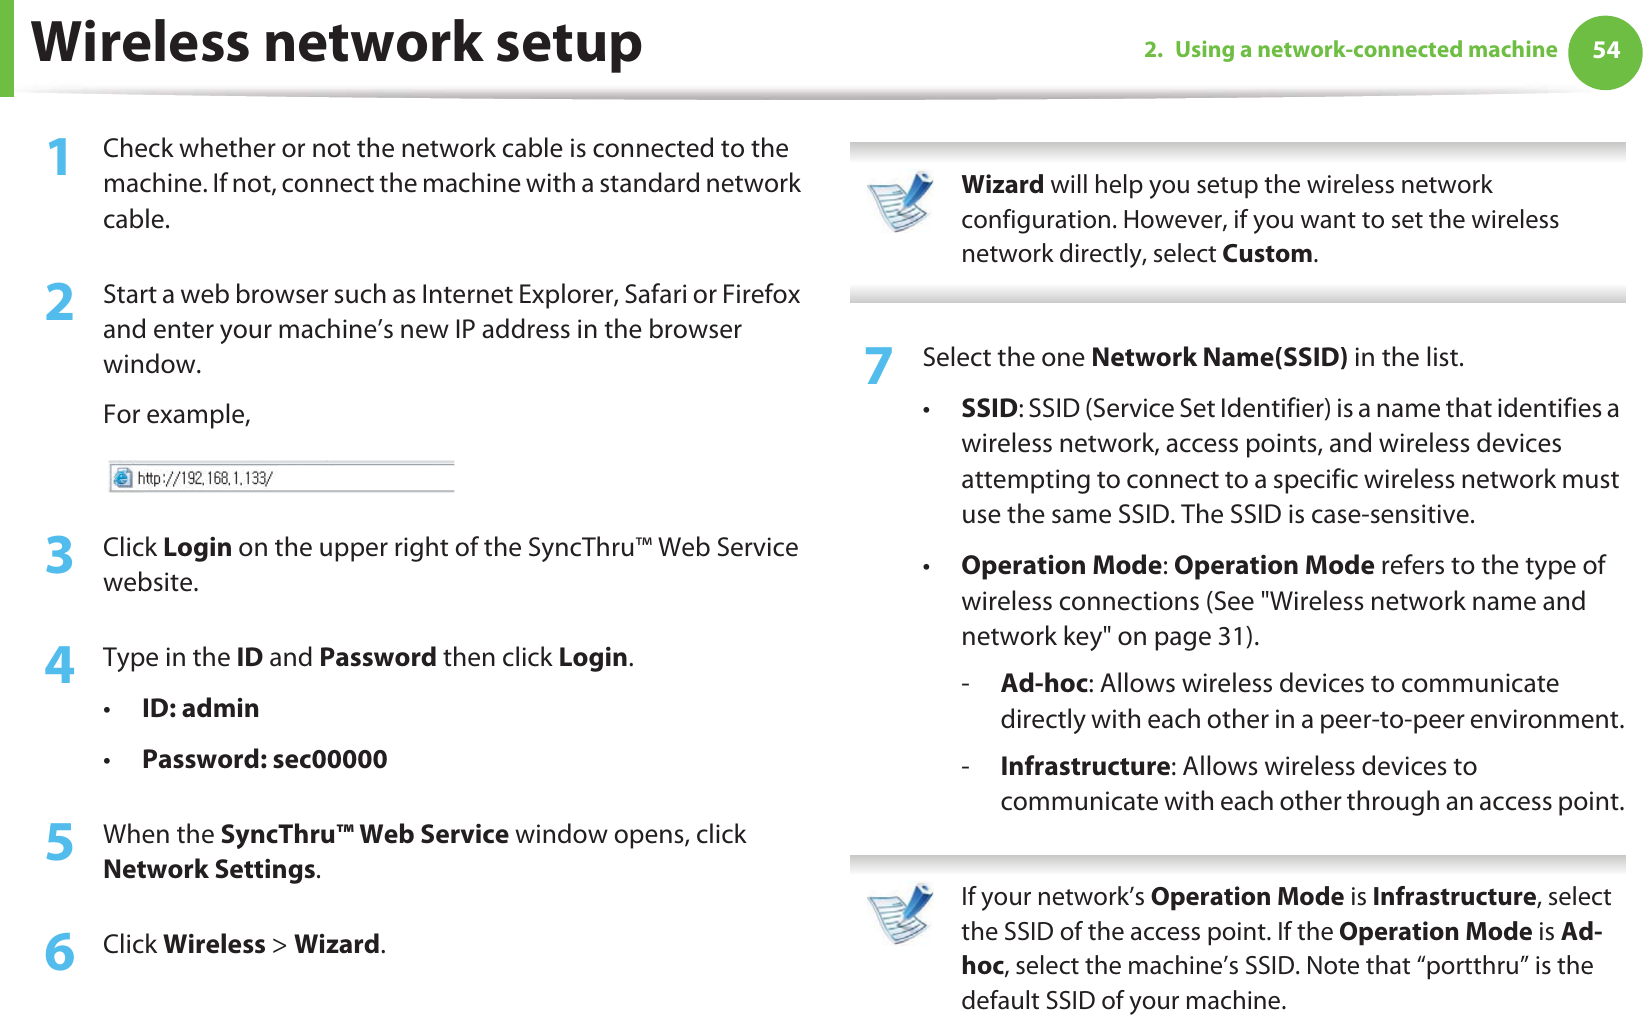 Wireless network setup 542. Using a network-connected machine1Check whether or not the network cable is connected to the machine. If not, connect the machine with a standard network cable.2  Start a web browser such as Internet Explorer, Safari or Firefox and enter your machine’s new IP address in the browser window.For example,3  Click Login on the upper right of the SyncThru™ Web Service website.4  Type in the ID and Password then click Login.•ID: admin •Password: sec00000 5  When the SyncThru™ Web Service window opens, click Network Settings.6  Click Wireless &gt; Wizard. Wizard will help you setup the wireless network configuration. However, if you want to set the wireless network directly, select Custom. 7  Select the one Network Name(SSID) in the list.•SSID: SSID (Service Set Identifier) is a name that identifies a wireless network, access points, and wireless devices attempting to connect to a specific wireless network must use the same SSID. The SSID is case-sensitive.•Operation Mode: Operation Mode refers to the type of wireless connections (See &quot;Wireless network name and network key&quot; on page 31).-Ad-hoc: Allows wireless devices to communicate directly with each other in a peer-to-peer environment.-Infrastructure: Allows wireless devices to communicate with each other through an access point. If your network’s Operation Mode is Infrastructure, select the SSID of the access point. If the Operation Mode is Ad-hoc, select the machine’s SSID. Note that “portthru” is the default SSID of your machine. 